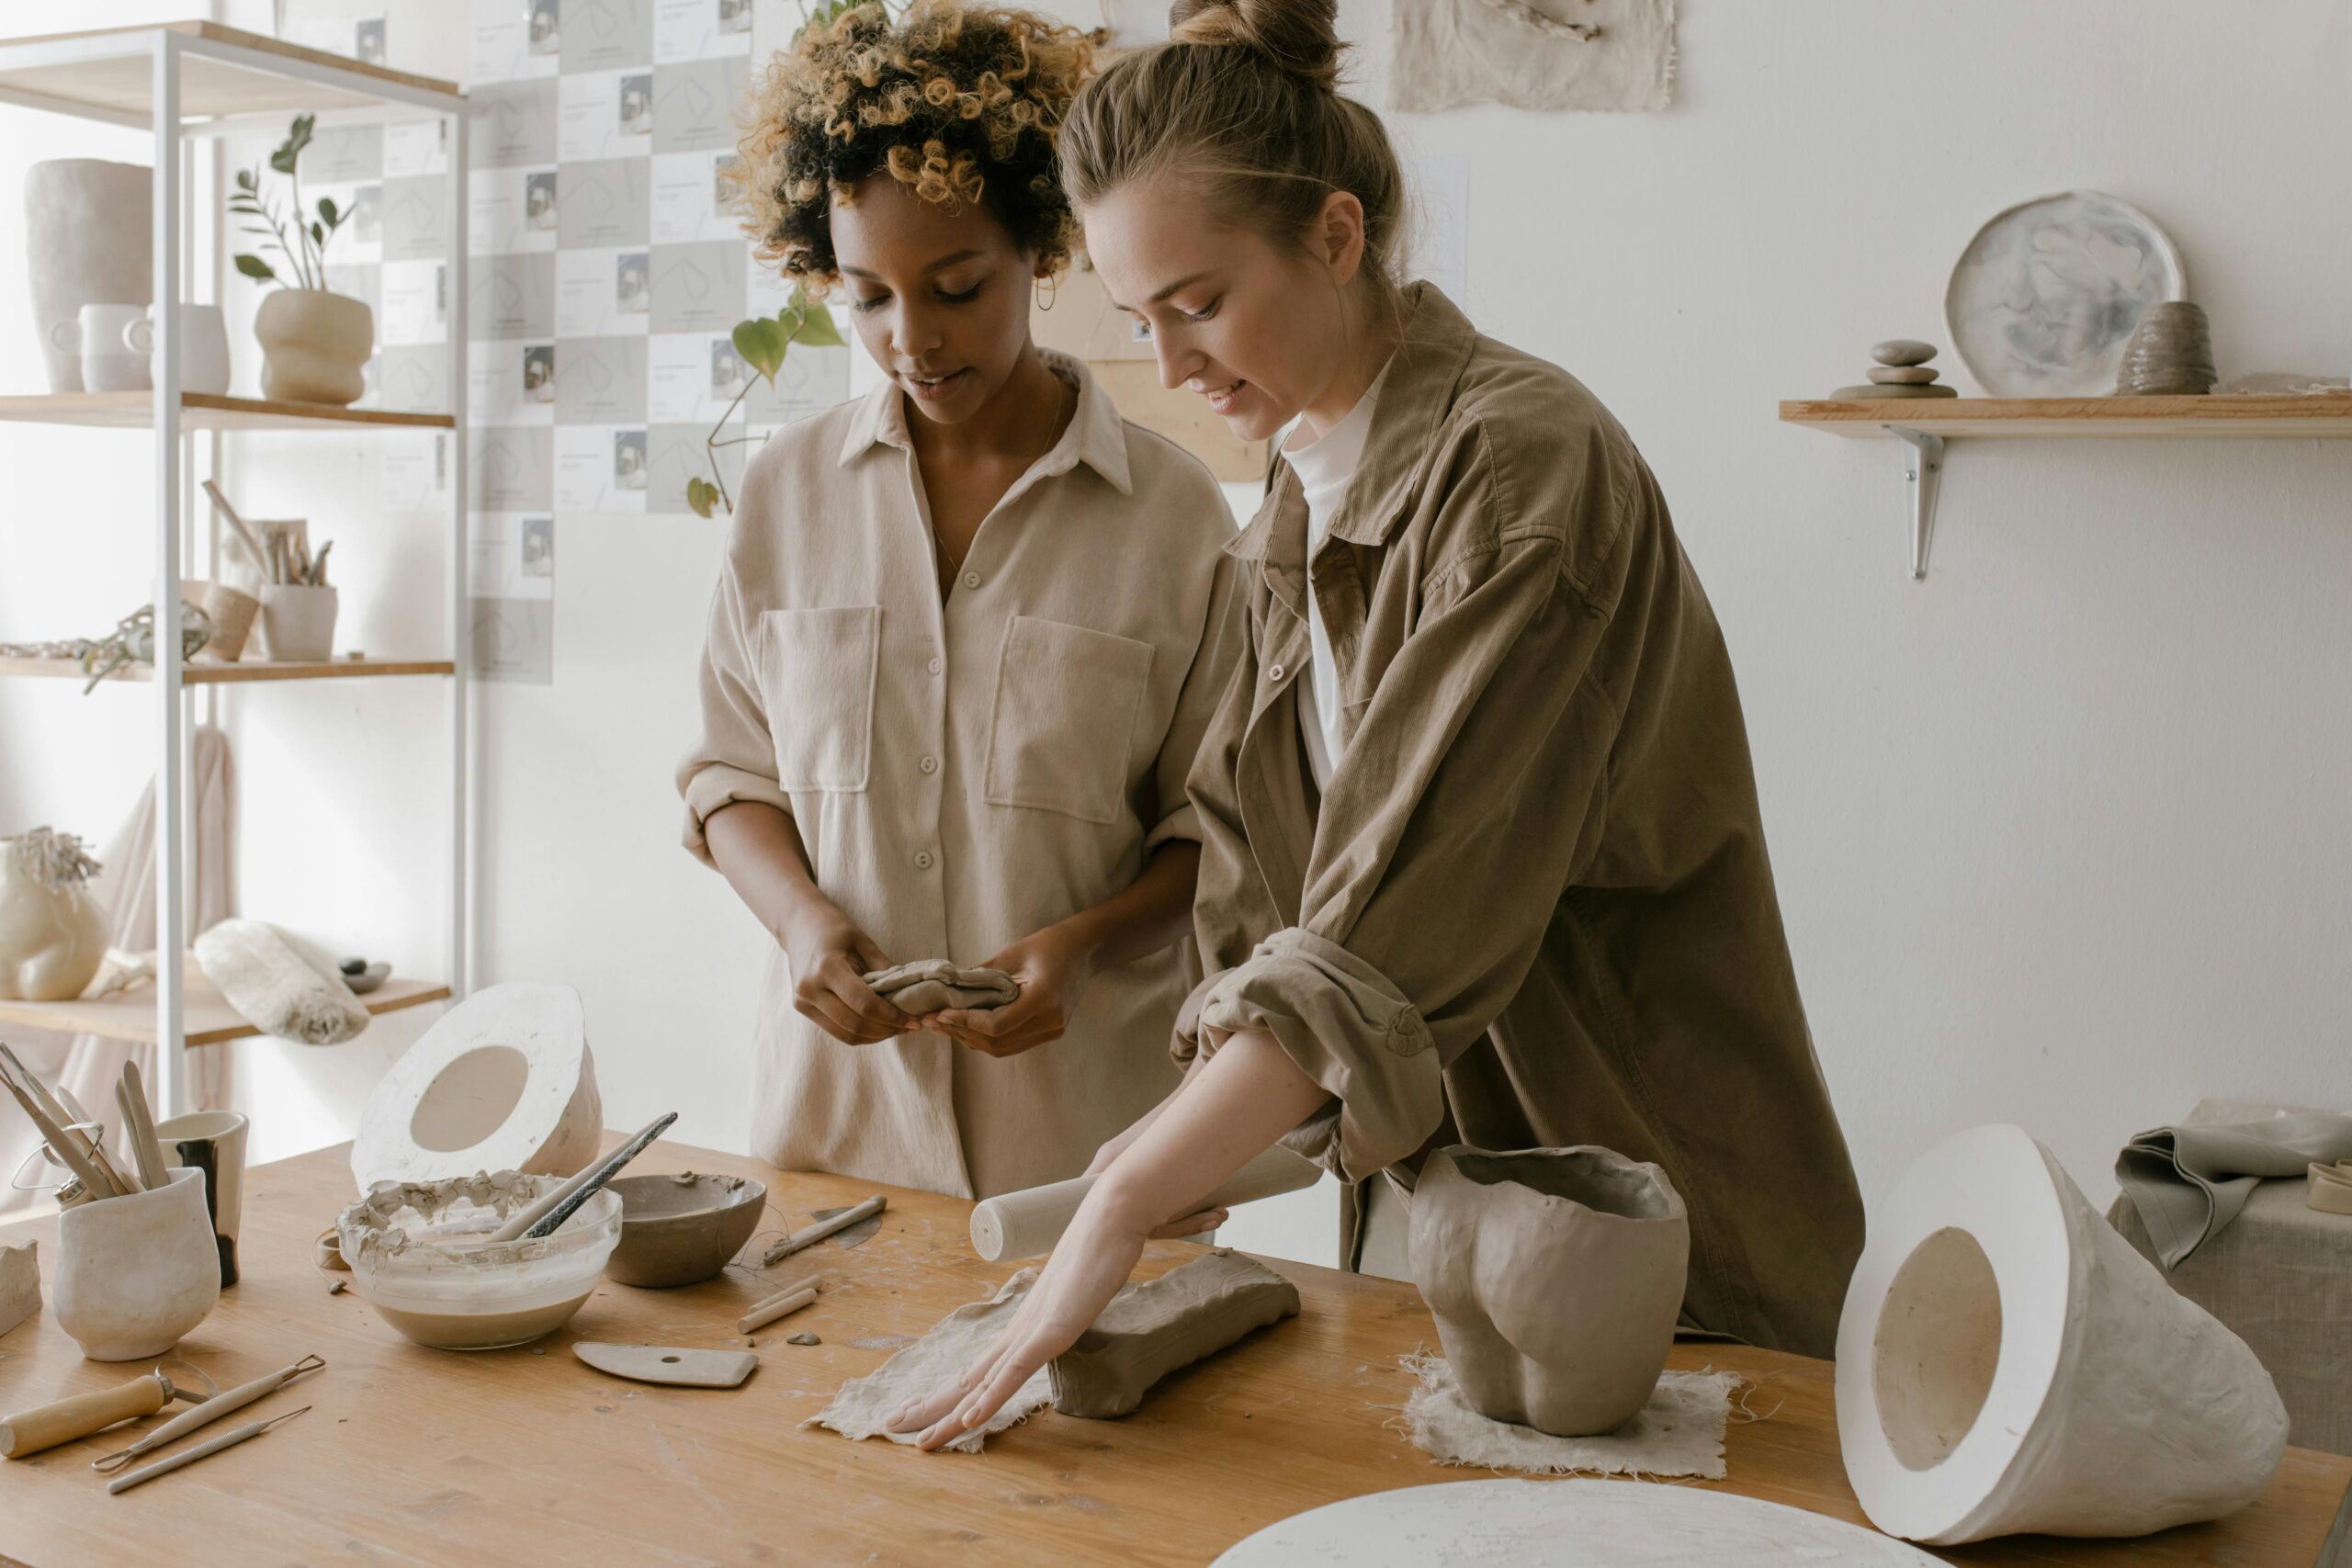 Craft Your Own Creations: The Best Adult Pottery Kits